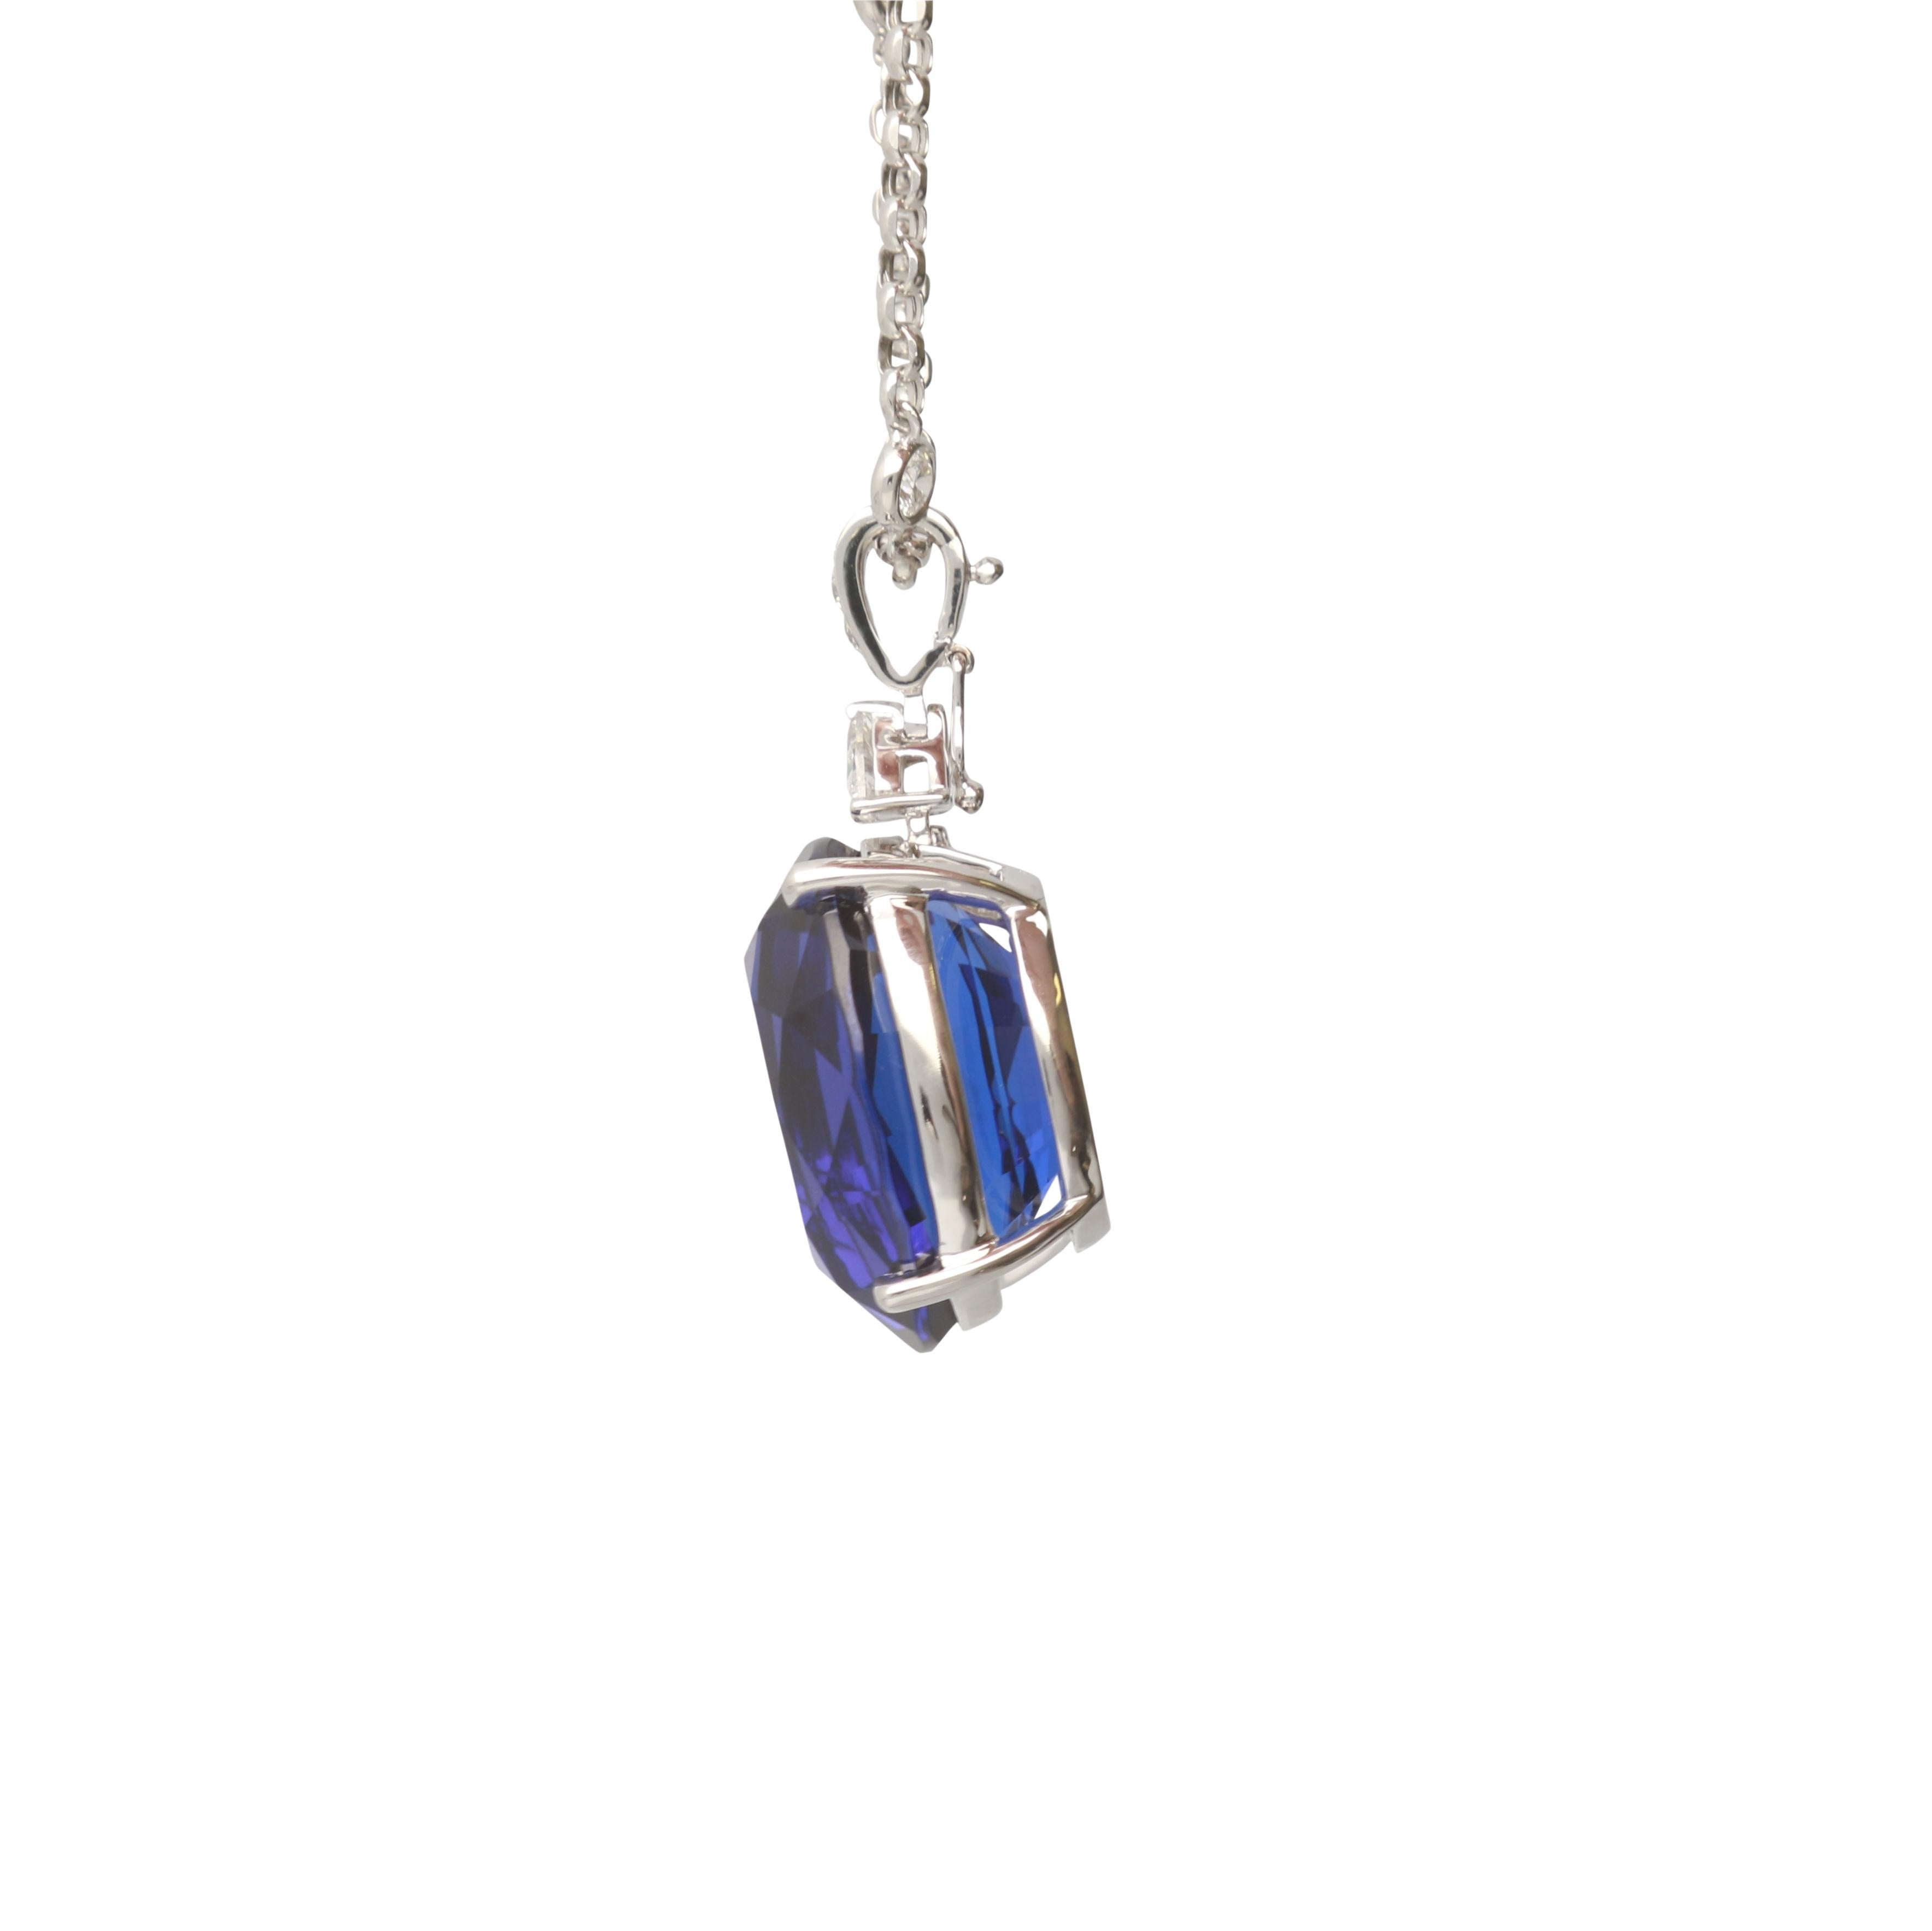 This one of a kind Necklace is crafted in 18-karat White Gold and features an oval cut IGL certified Tanzanite 37.39 Carat, 1 Trillian cut Diamond 0.33 Carat & 12 Round Brilliant cut Diamond 0.93 Carat. This Necklace comes with four bezel set